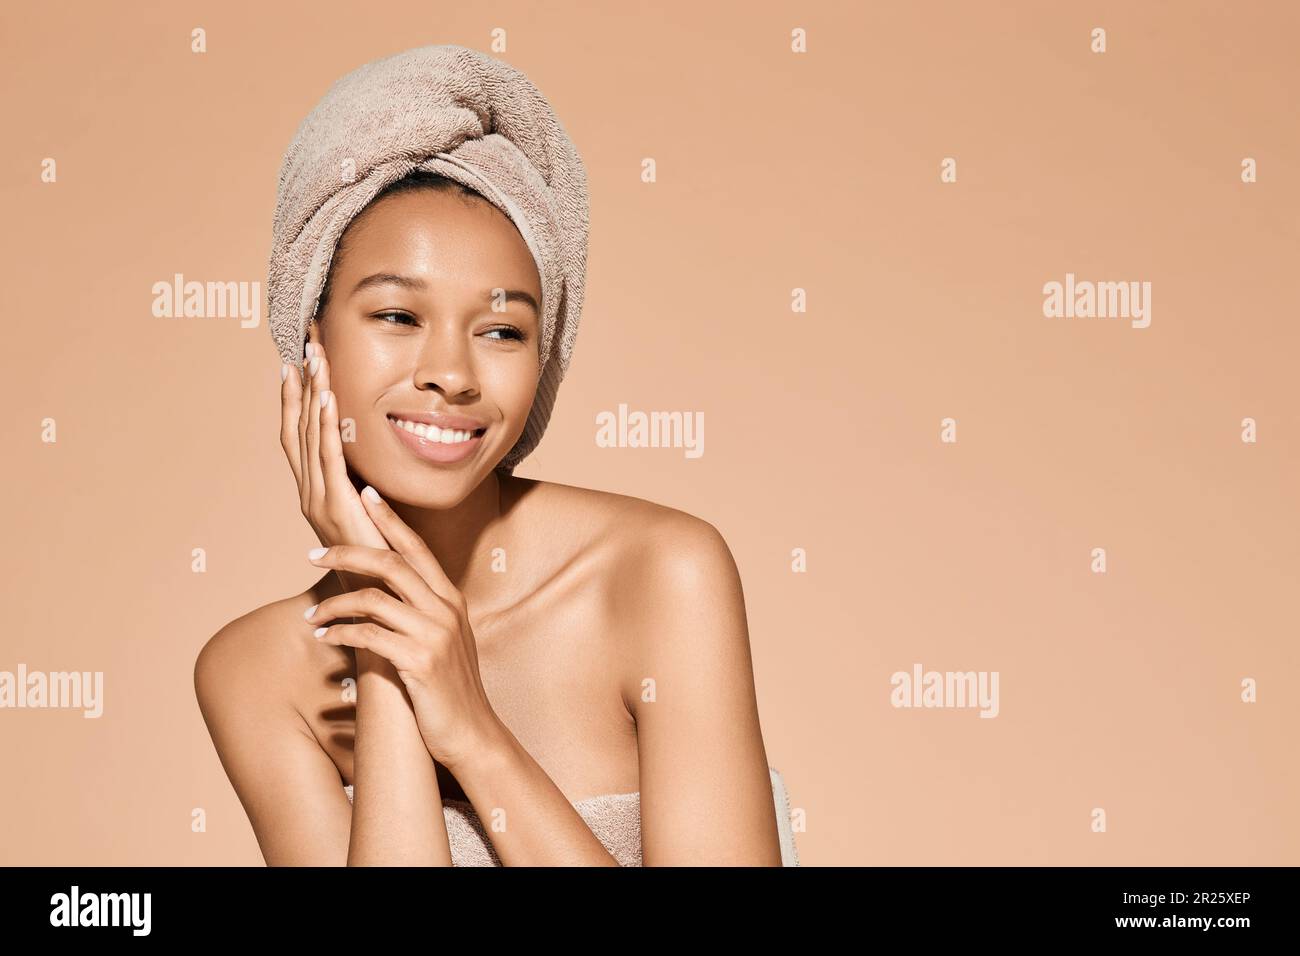 beauty portrait of African woman with perfect skin and towel around her head on beige background. Body care concept Stock Photo